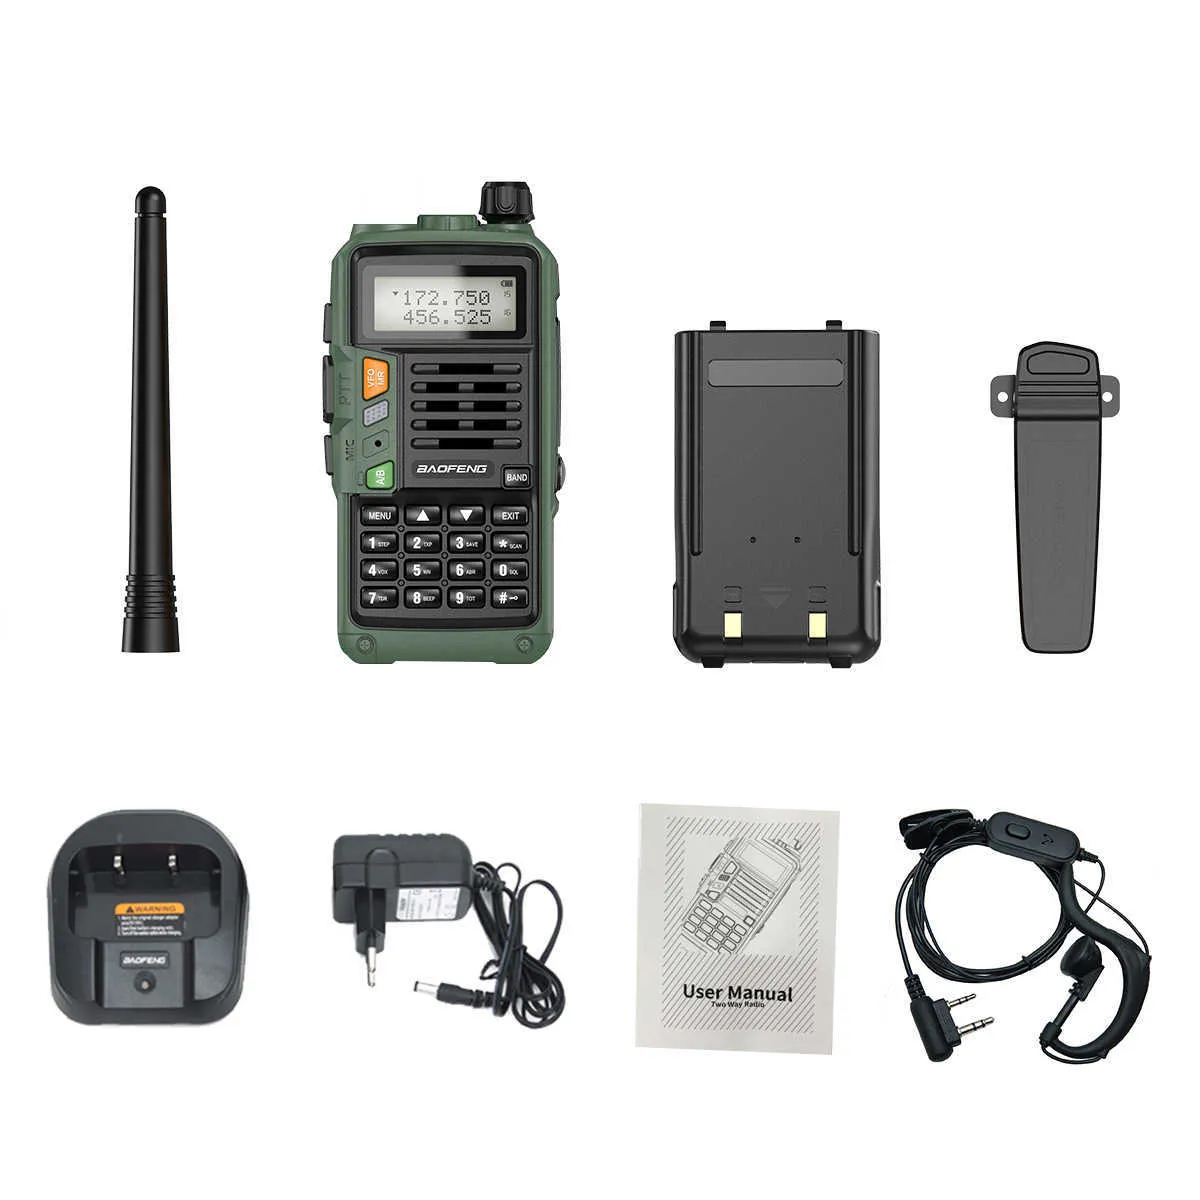 BaoFeng UVS9 Plus Powerful Walkie Talkie CB Radio Transceiver 10W 50 KM Long Range Portable For hunt forest upgrade 2108178825302